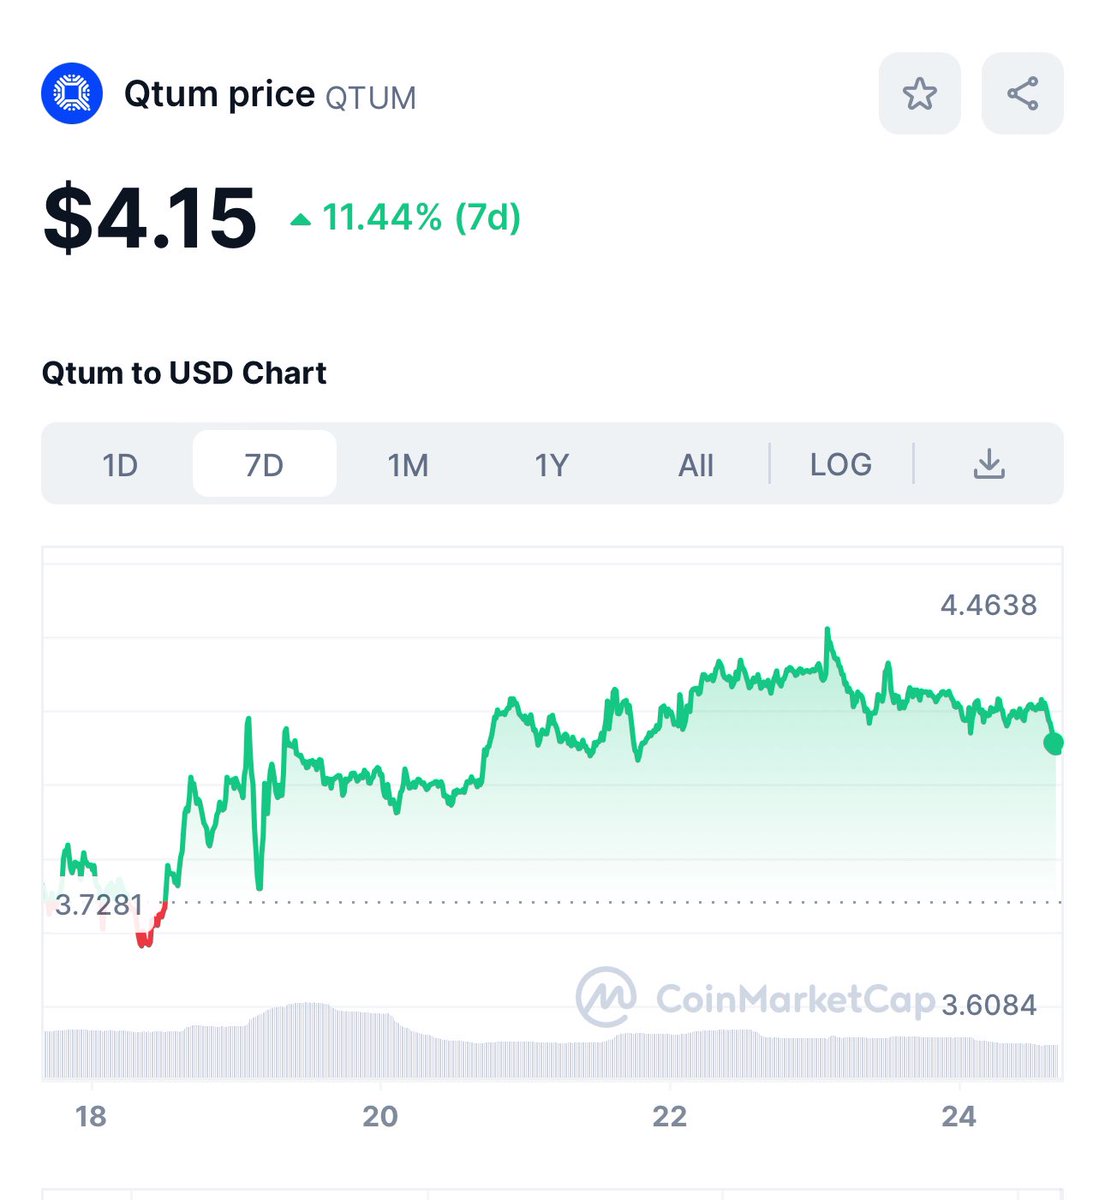 Excited about the #2024bullrun? @Qtum isn't just bringing history to the table - they're powering into the AI sector with 10k NVIDIA GPUs! ▫️From intelligent dialogue systems to emotional AI voice bots, they're pioneering the blockchain-AI merge. Are you on board with this